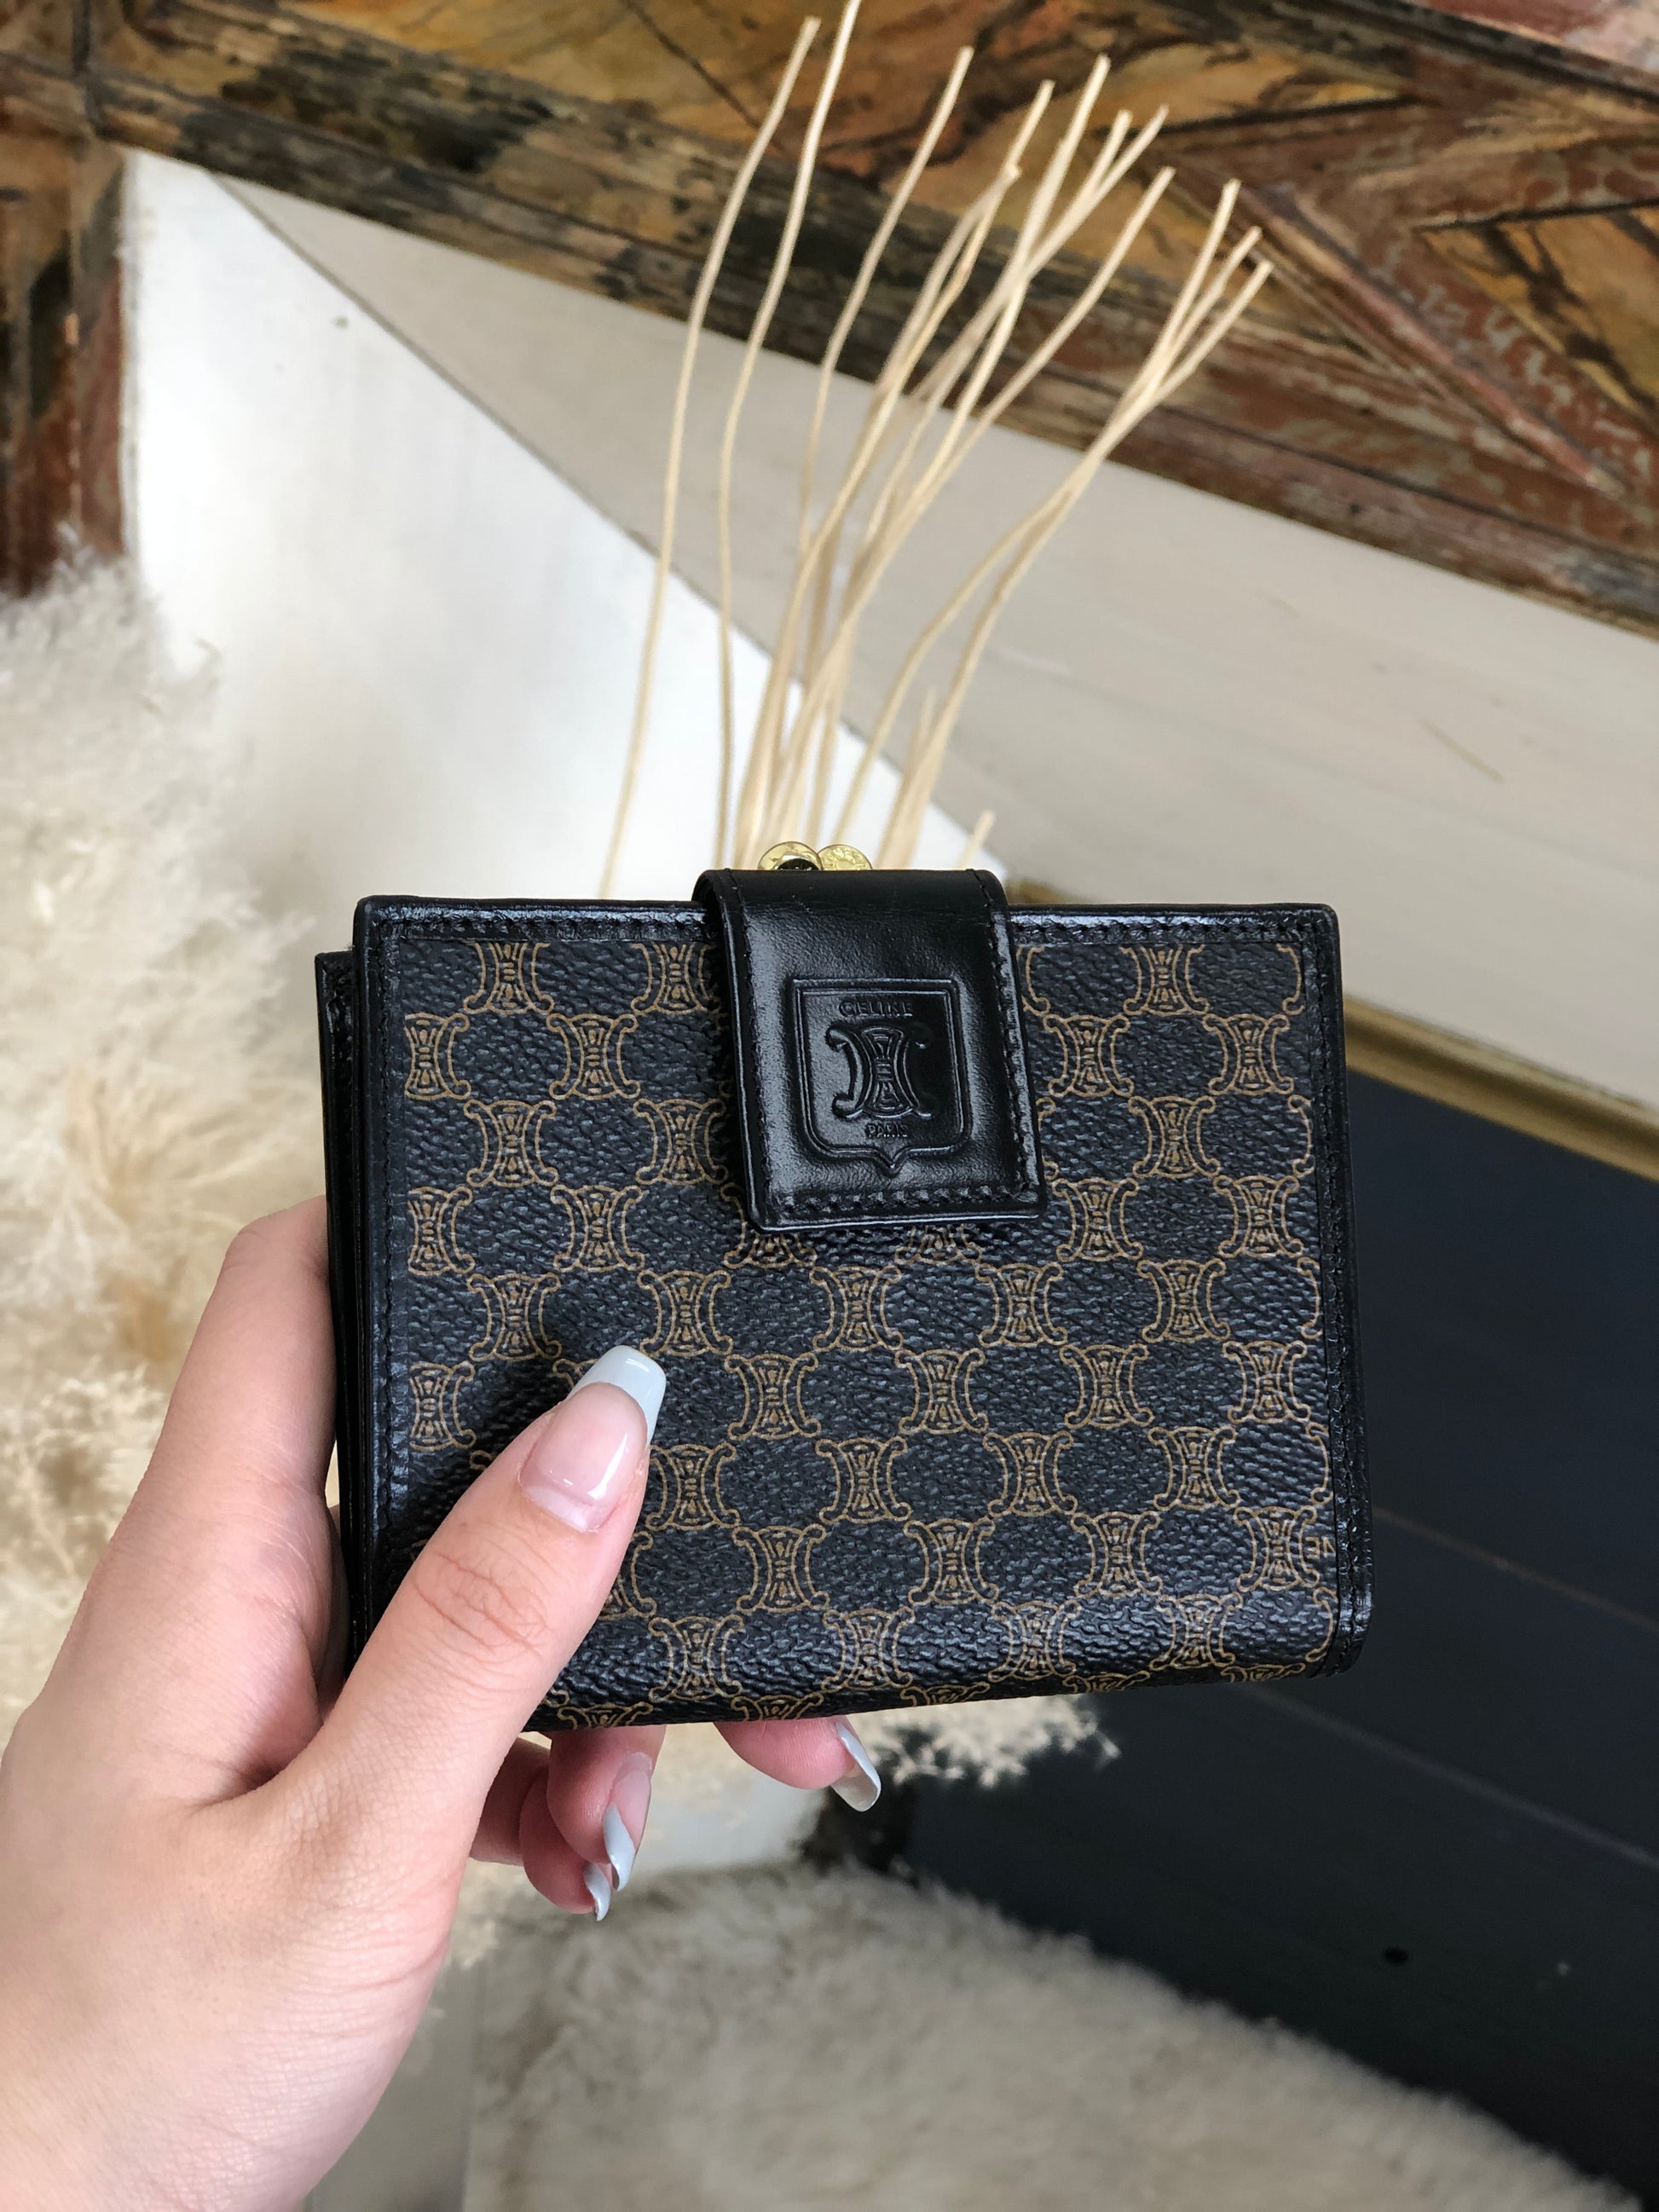 Celine compact wallet from Japan